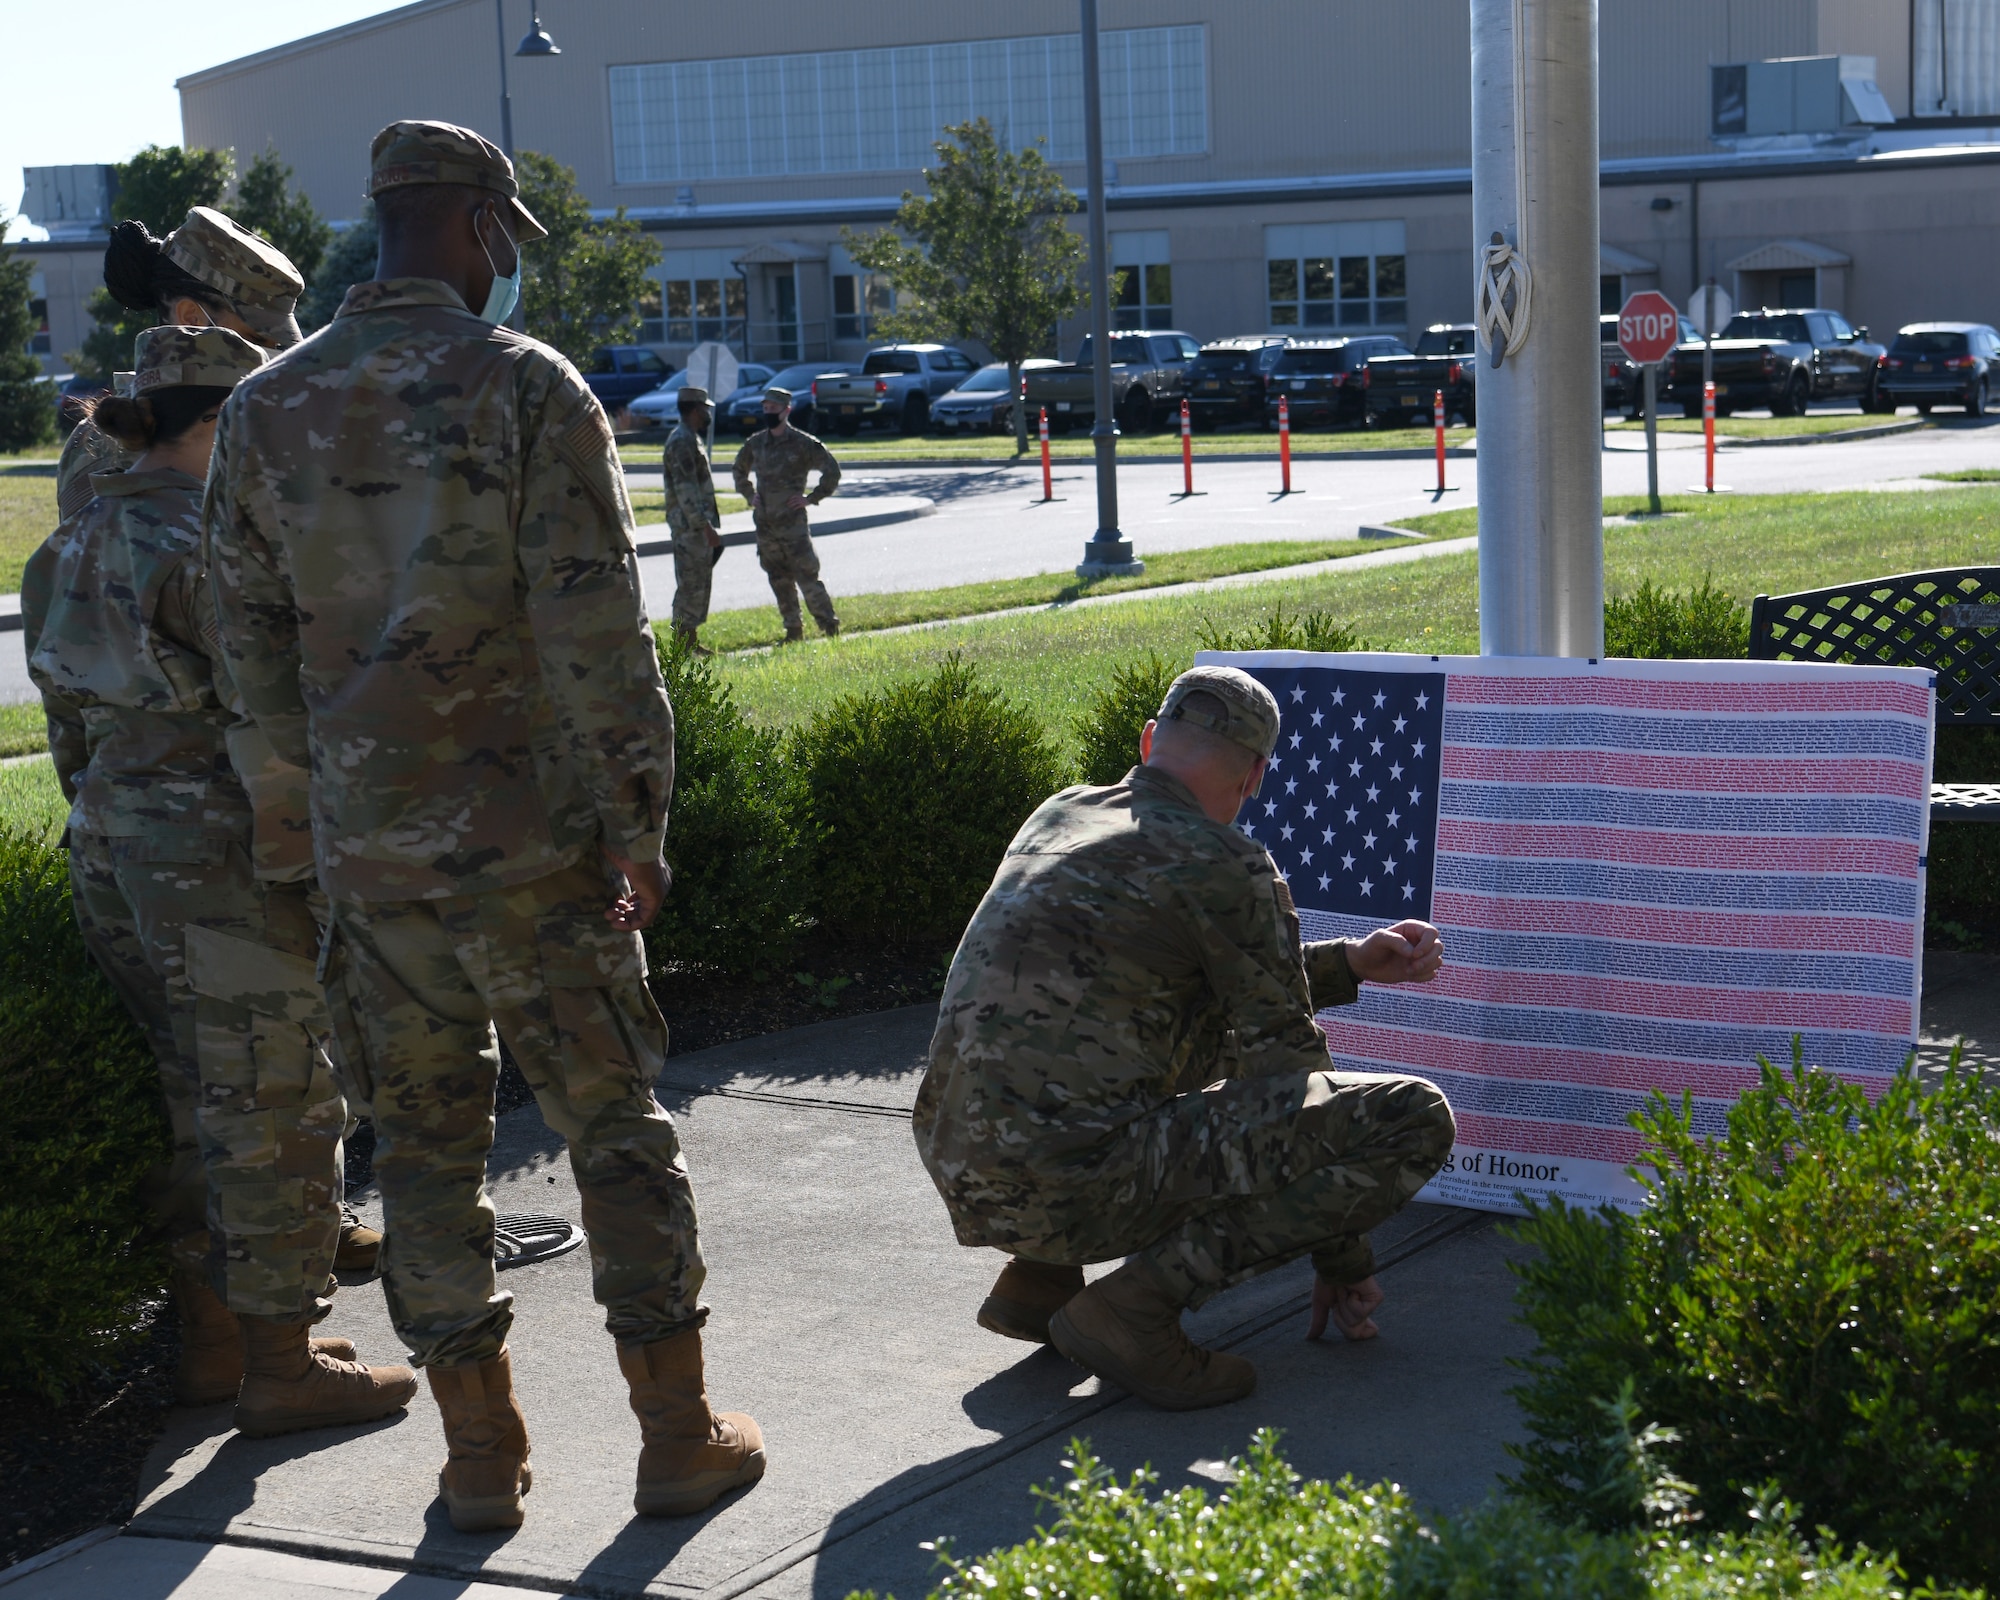 Airmen from the 106th Rescue Wing assigned to the New York National Guard pay tribute to 9/11 victims on the Flag of Honor, September 11, 2021, at Gabreski Air National Guard Base in Westhampton Beach, N.Y. The Flag of Honor, comprised of the names of those who died in the terror attacks on 9/11 and in the 1993 World Trade Center bombing, was on display during the 20th anniversary of 9/11. (U.S. Air National Guard photo by Senior Airman Kevin J. Donaldson)